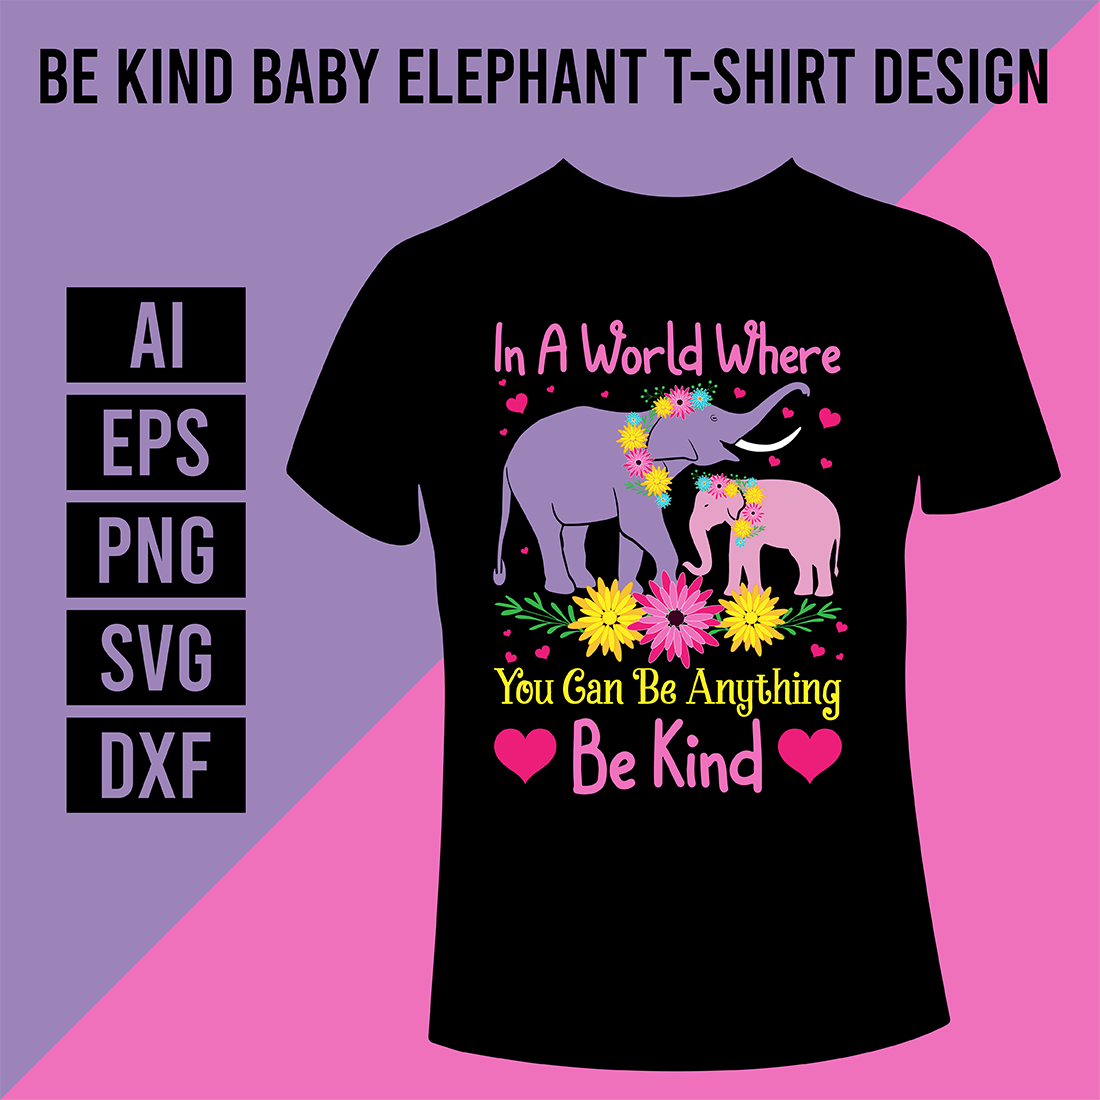 Be Kind Baby Elephant T-Shirt Design cover image.